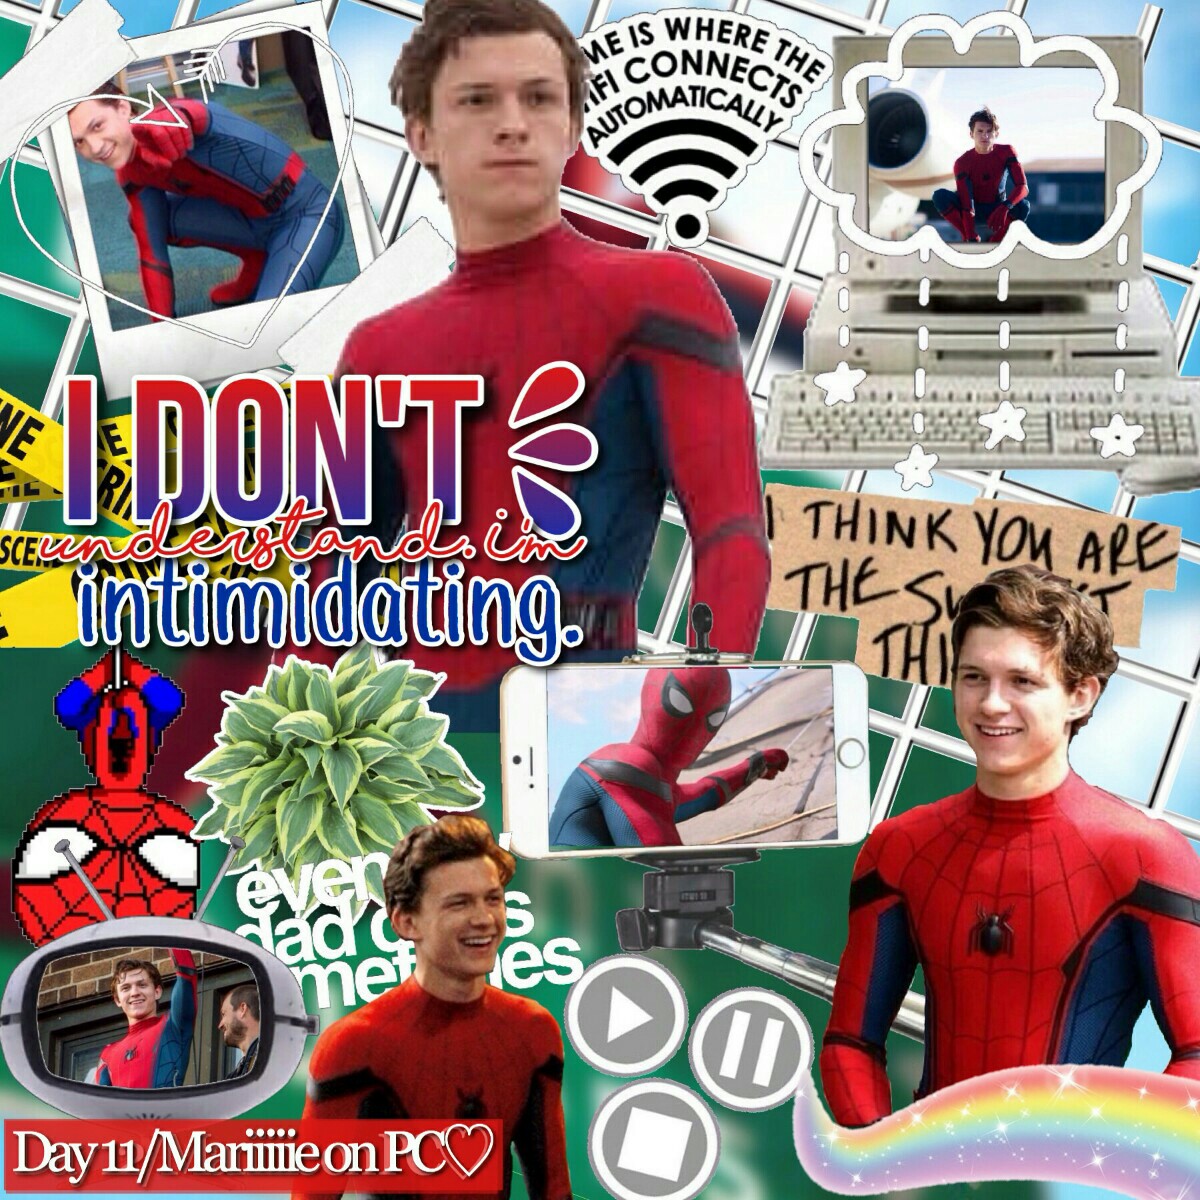 ⭐- T A P -⭐

12.11.17🤗

Day 11 - Spiderman 🕷

QOTD - Spiderman, The Amazing Spiderman or Spiderman Homecoming?

AOTD - Spiderman Homecoming ❤

💘